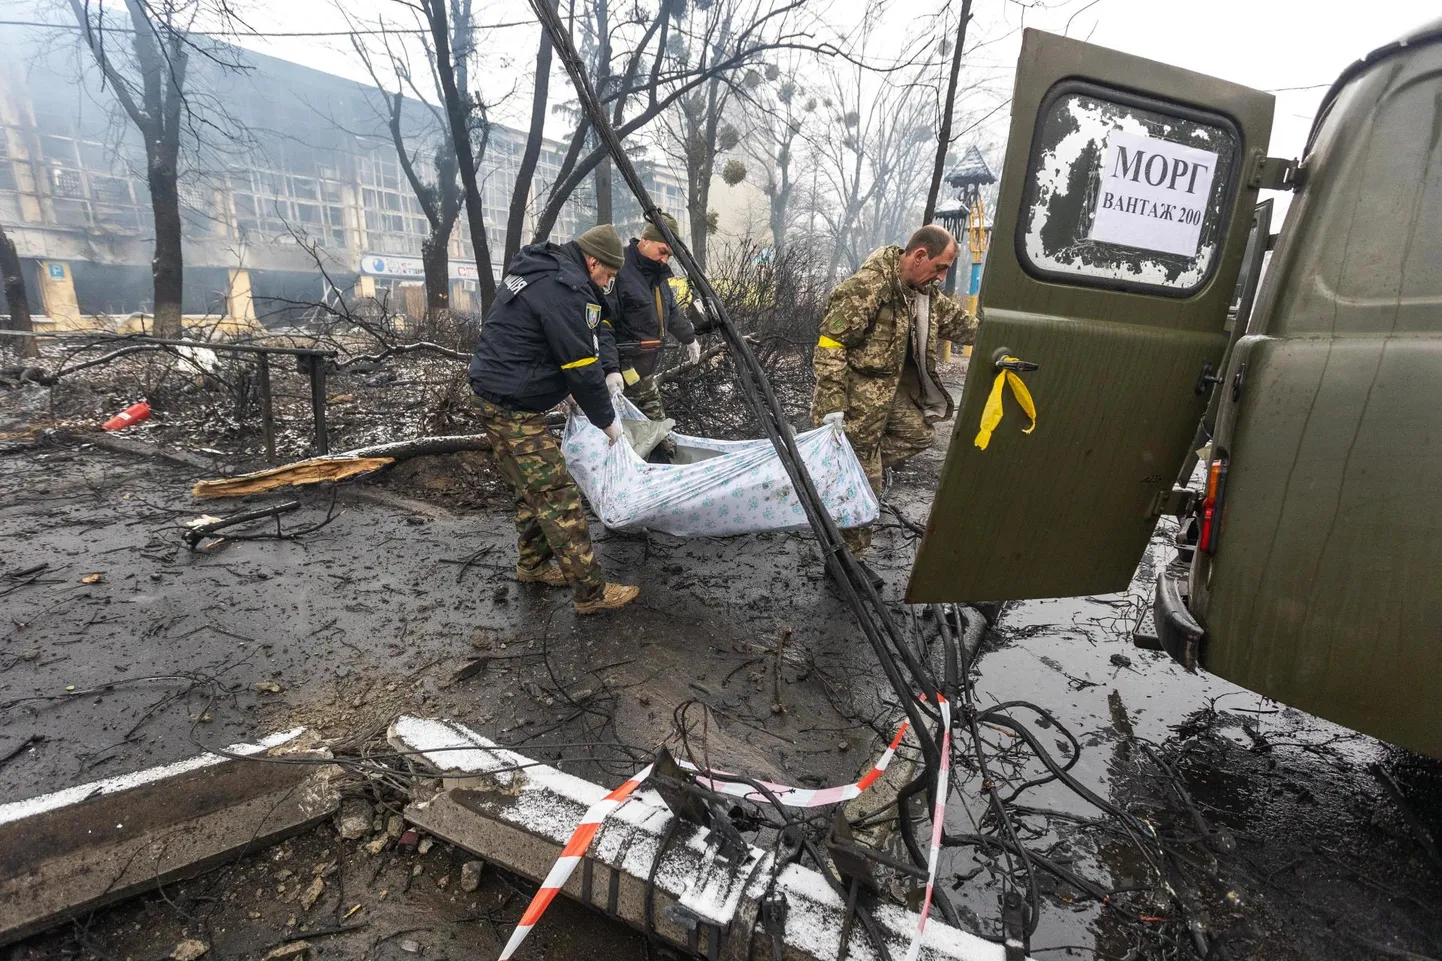 The rocket attack on the Kiev TV tower on March 2 affected both the TV tower itself and nearby buildings. Five people walking on the street at the same time were killed. Their lifeless bodies were delivered to the morgue the next morning at the end of the curfew.